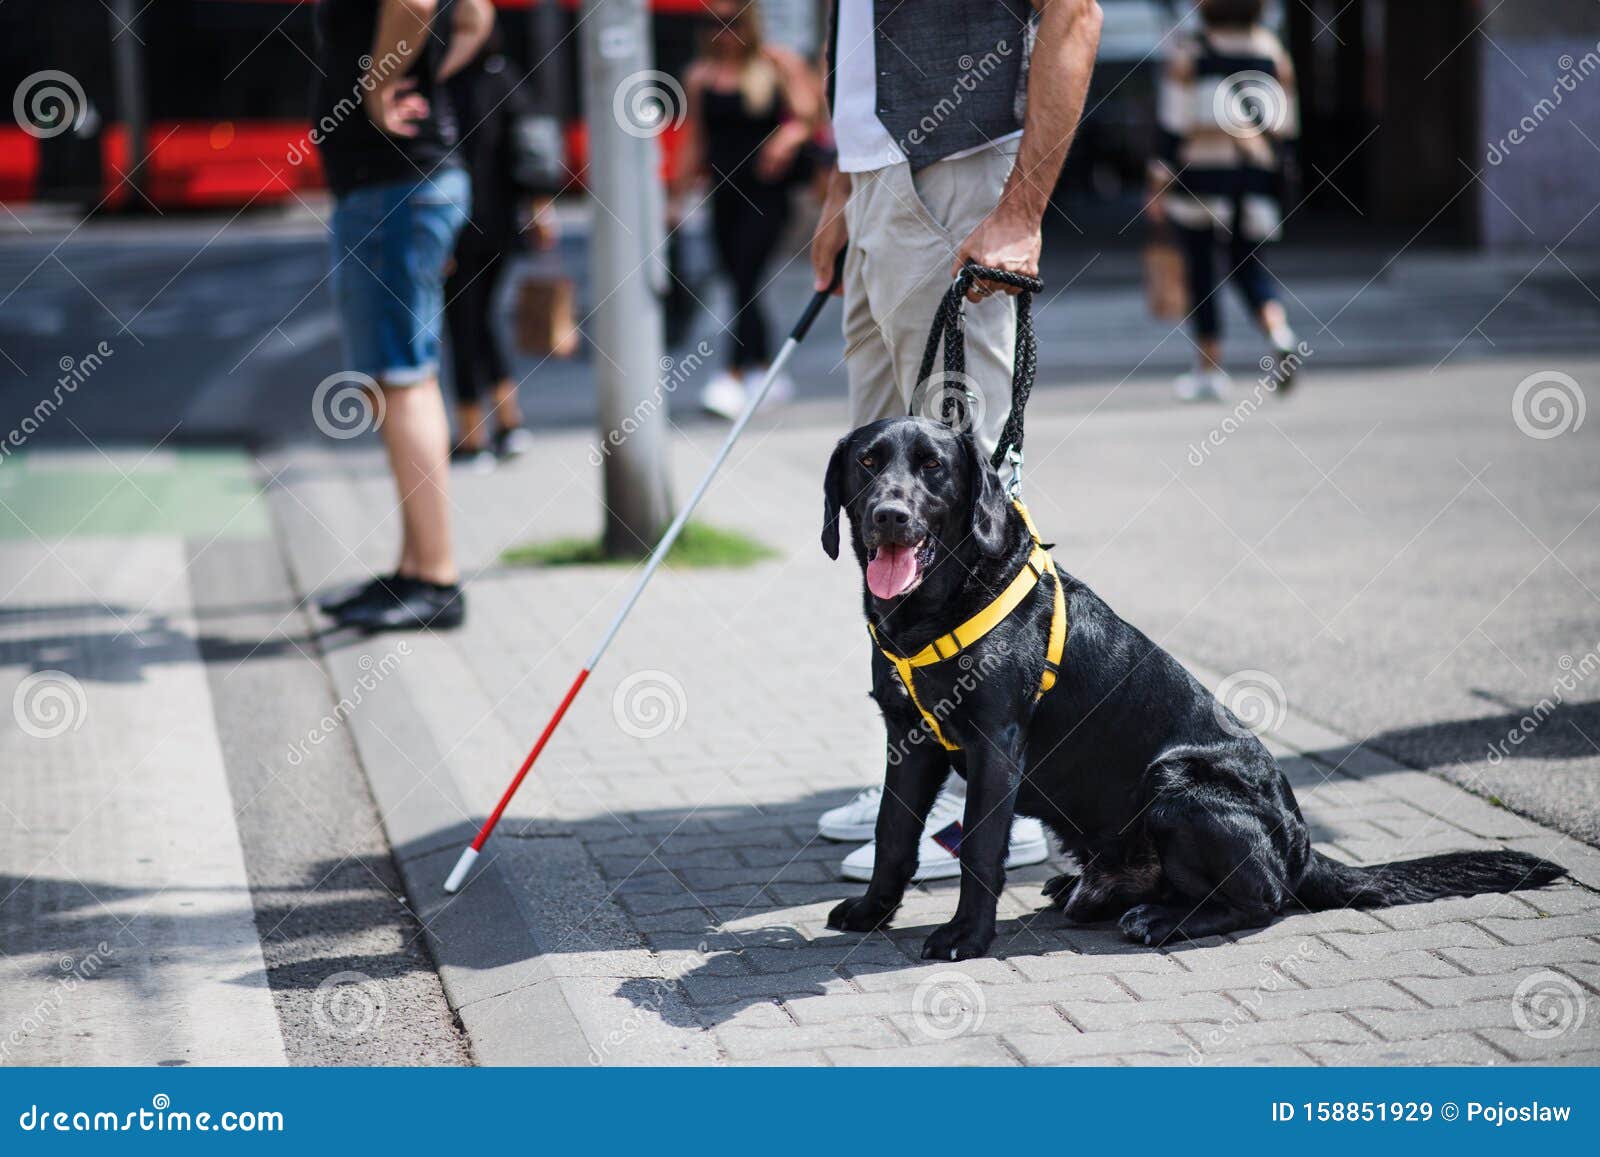 midsection of young blind man with guide dog waiting at zebra crossing in city.